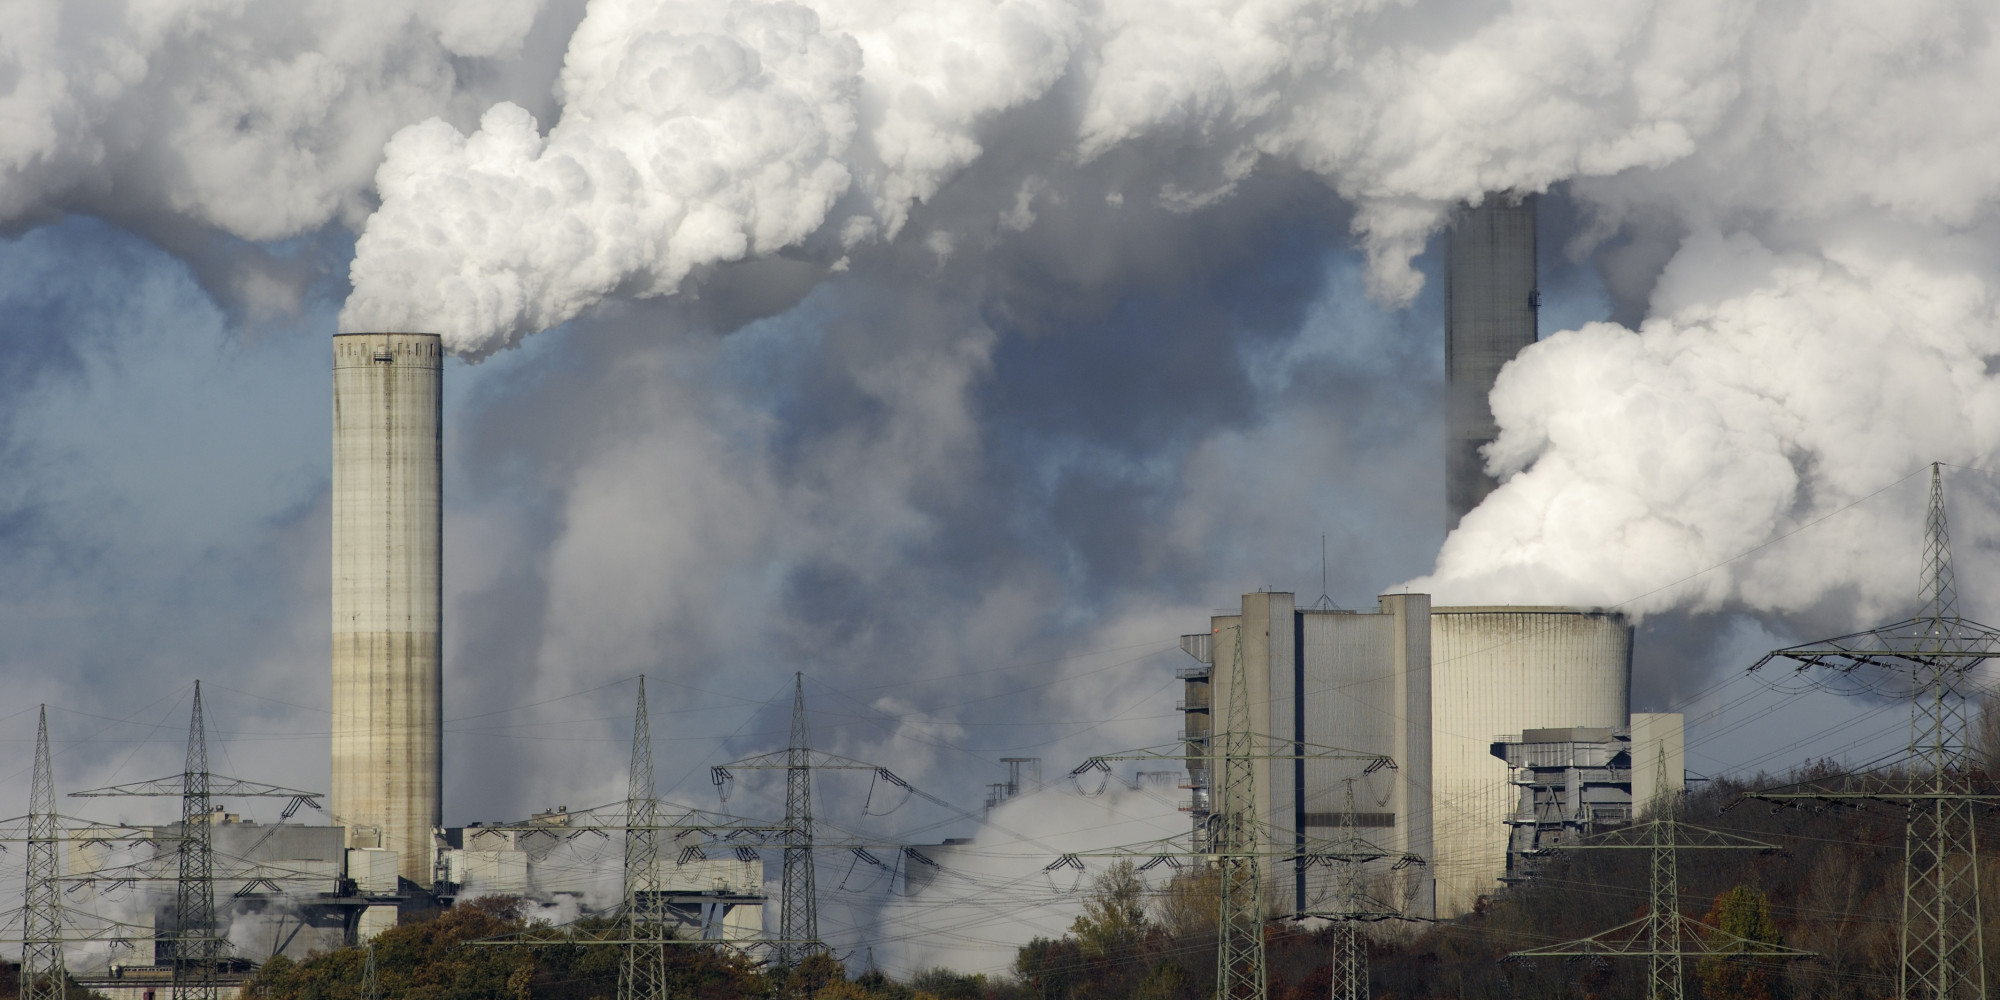 Coal Power plants like this one are becoming less economically viable. Photo: Huffington Post